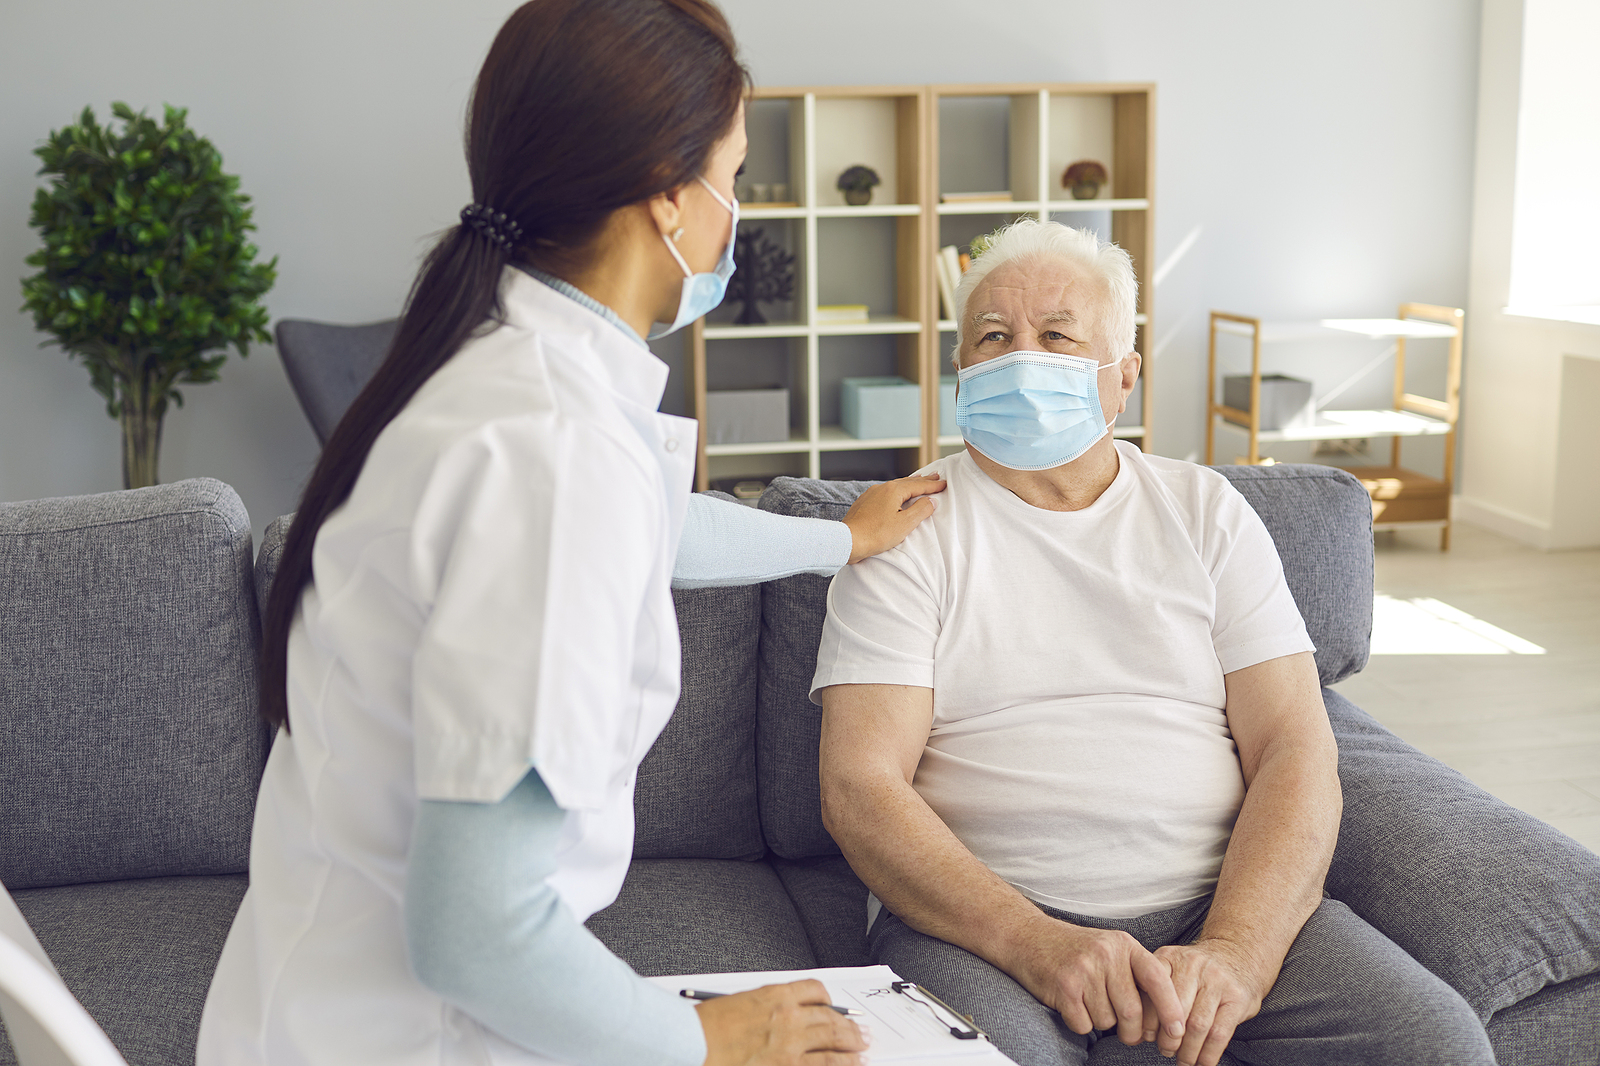 Cold Prevention Tips for Your Elderly Loved One